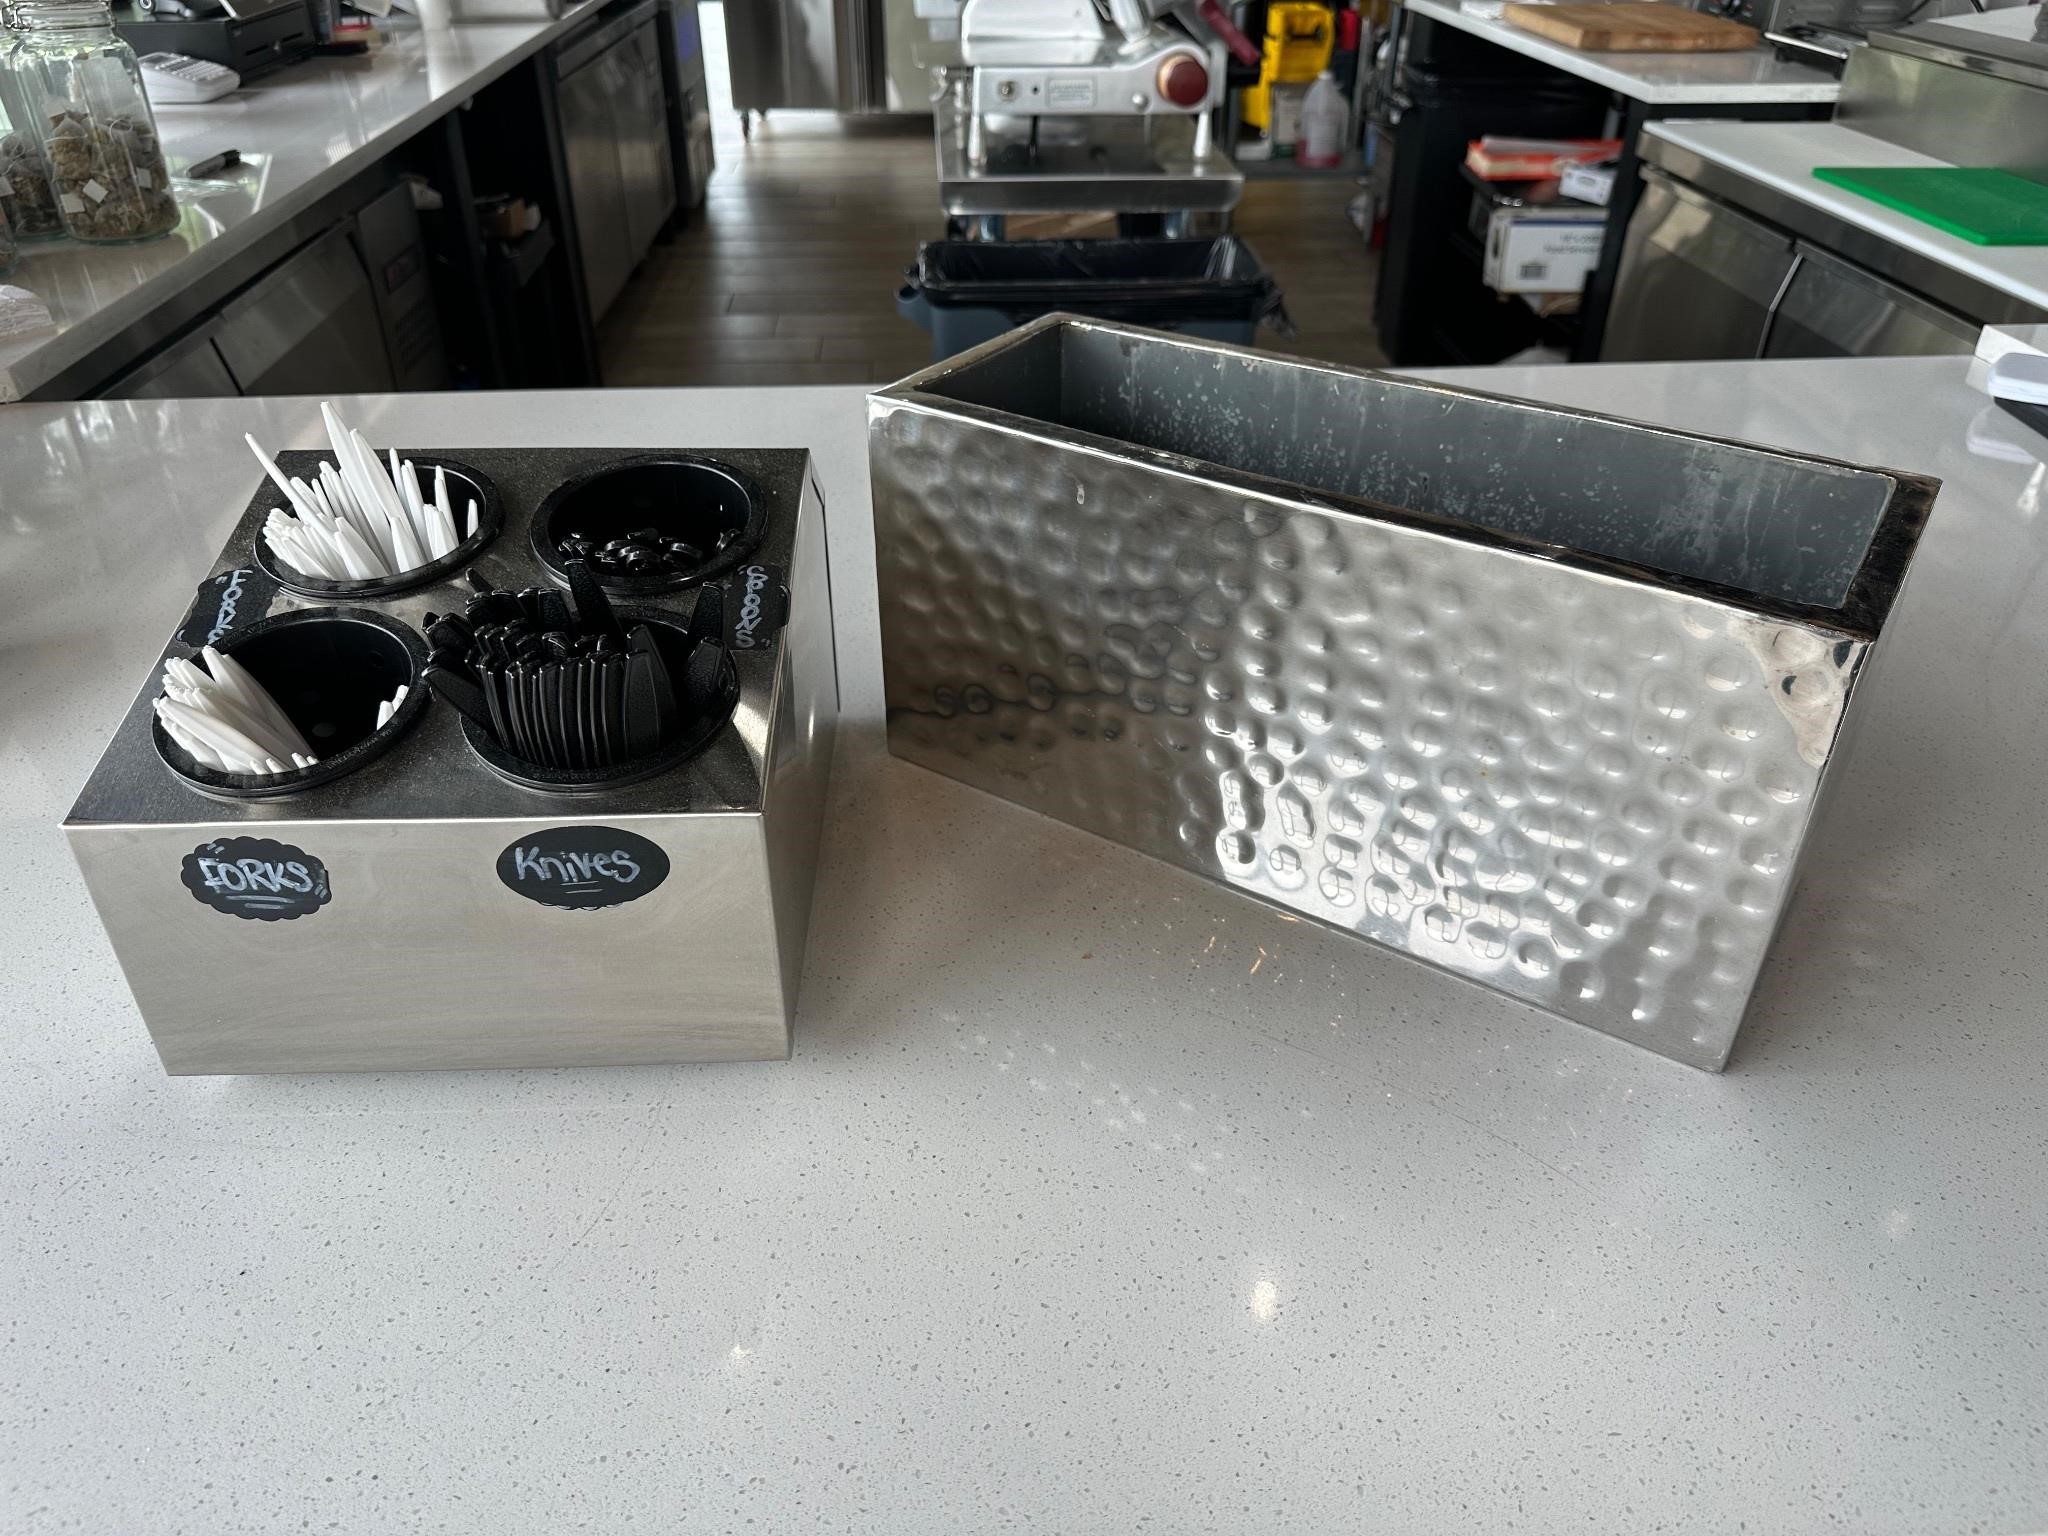 Chrome Utensil and Garbage Counter Holders